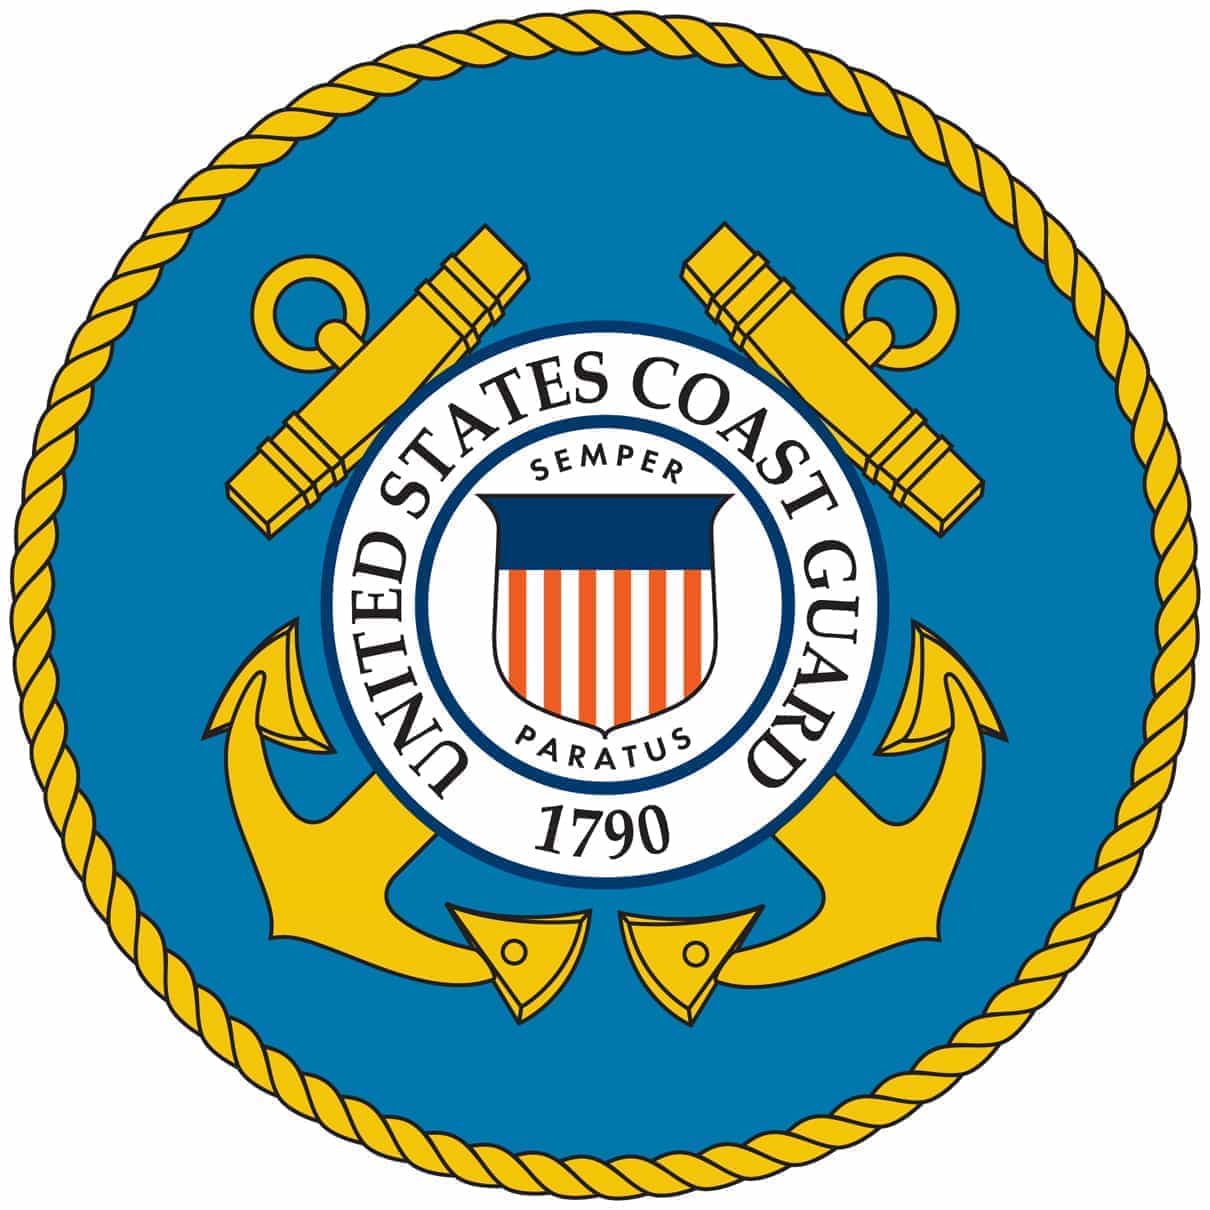 Boarded by the Coast Guard